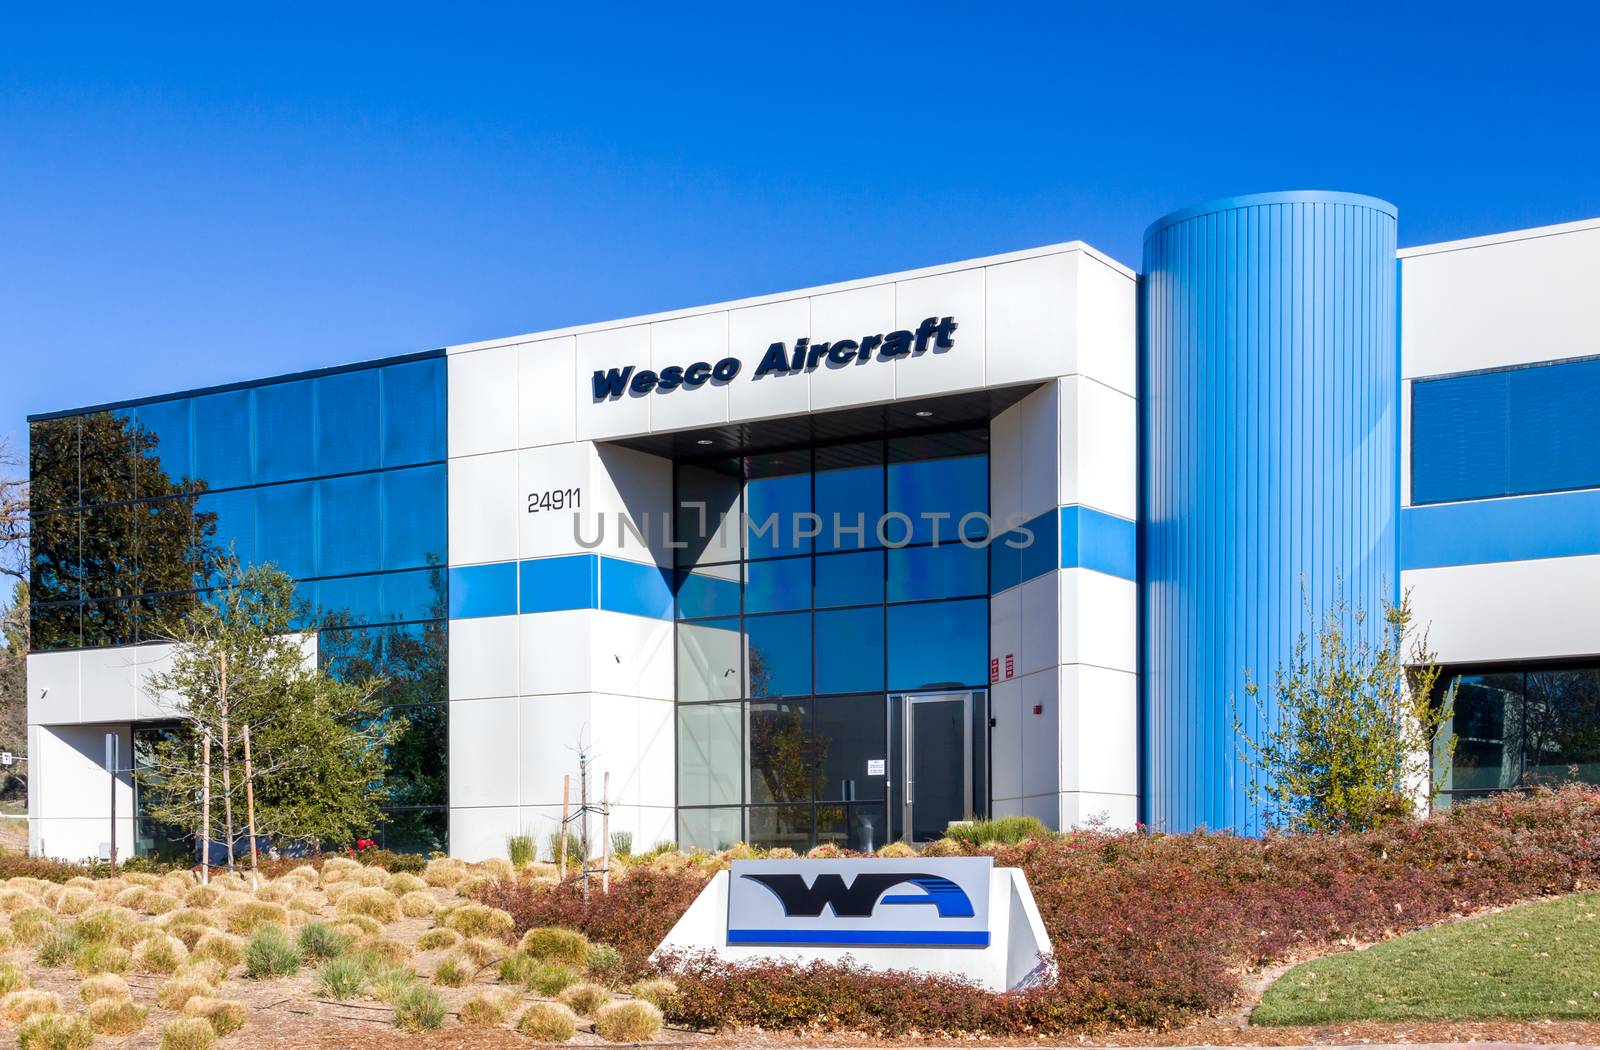 Wesco Aircraft Headquarters by wolterk